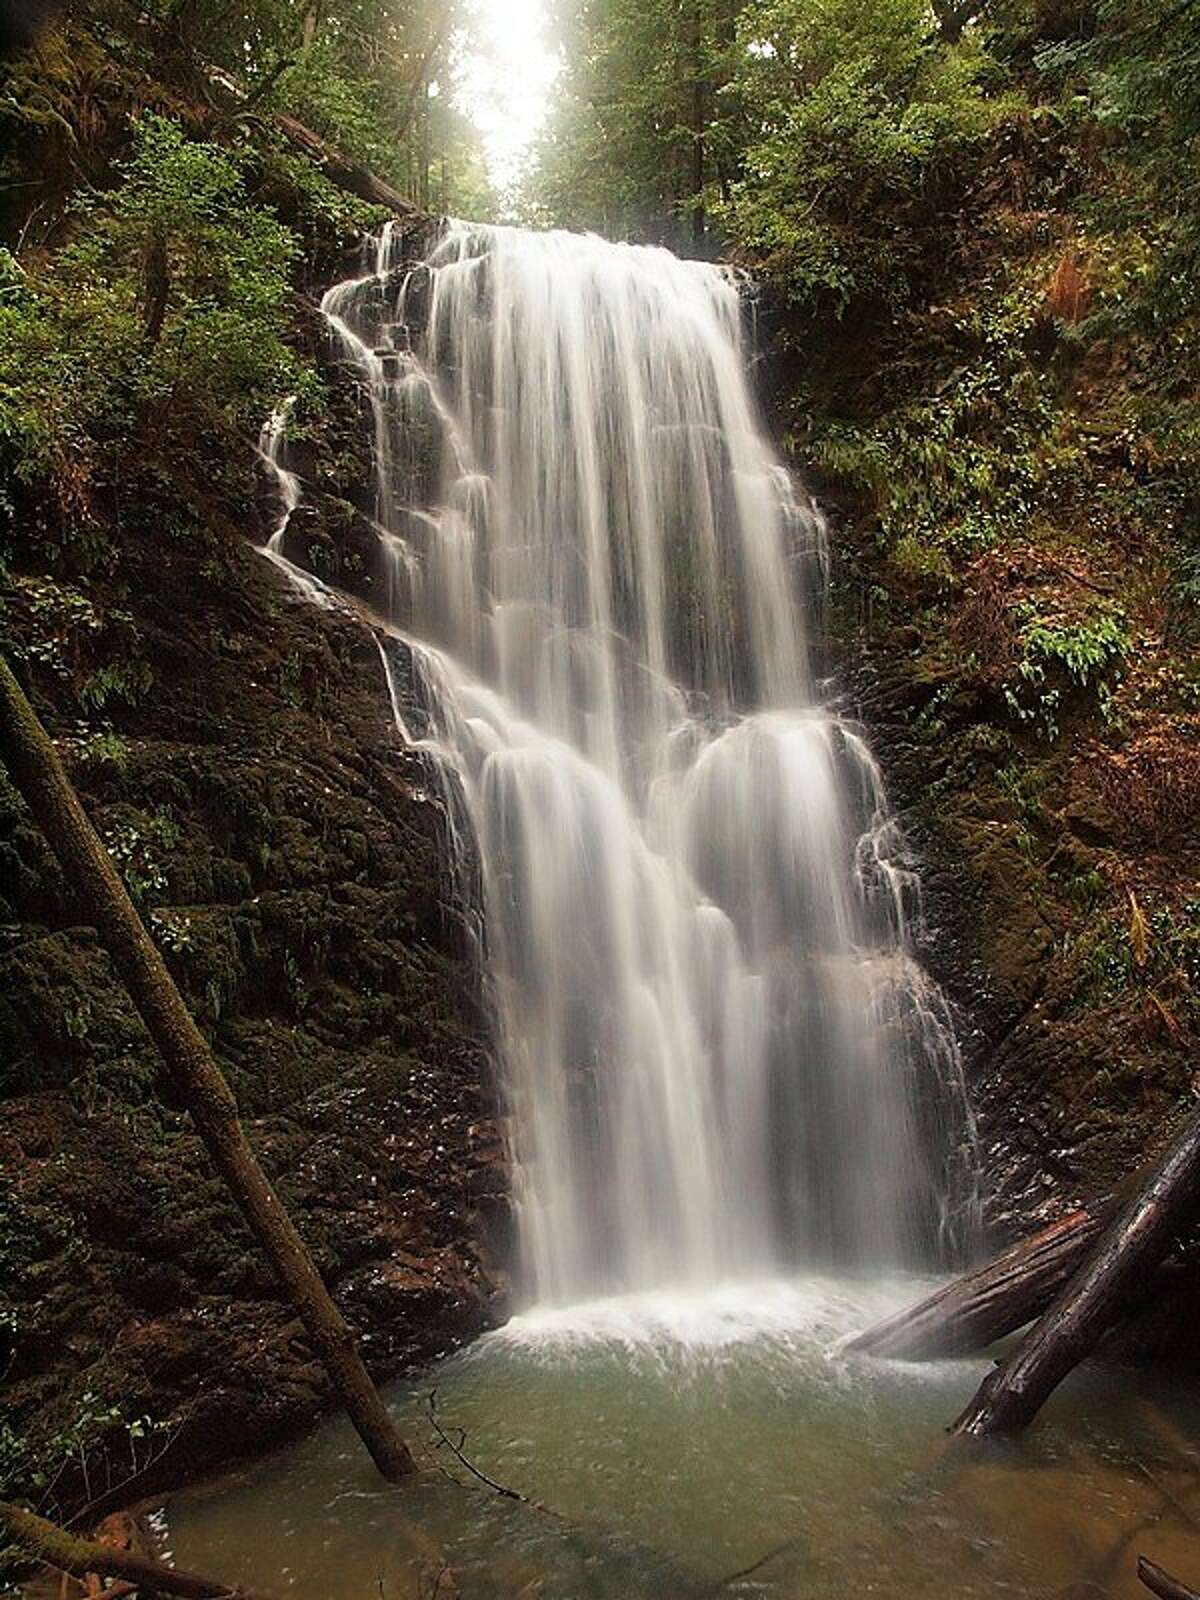 70-foot Berry Creek Falls is the destination for the region's best bike-and-hike, a six-mile ride and half-mile walk from Ranch del Oso, the coastal outpost for Big Basin Redwoods State Park